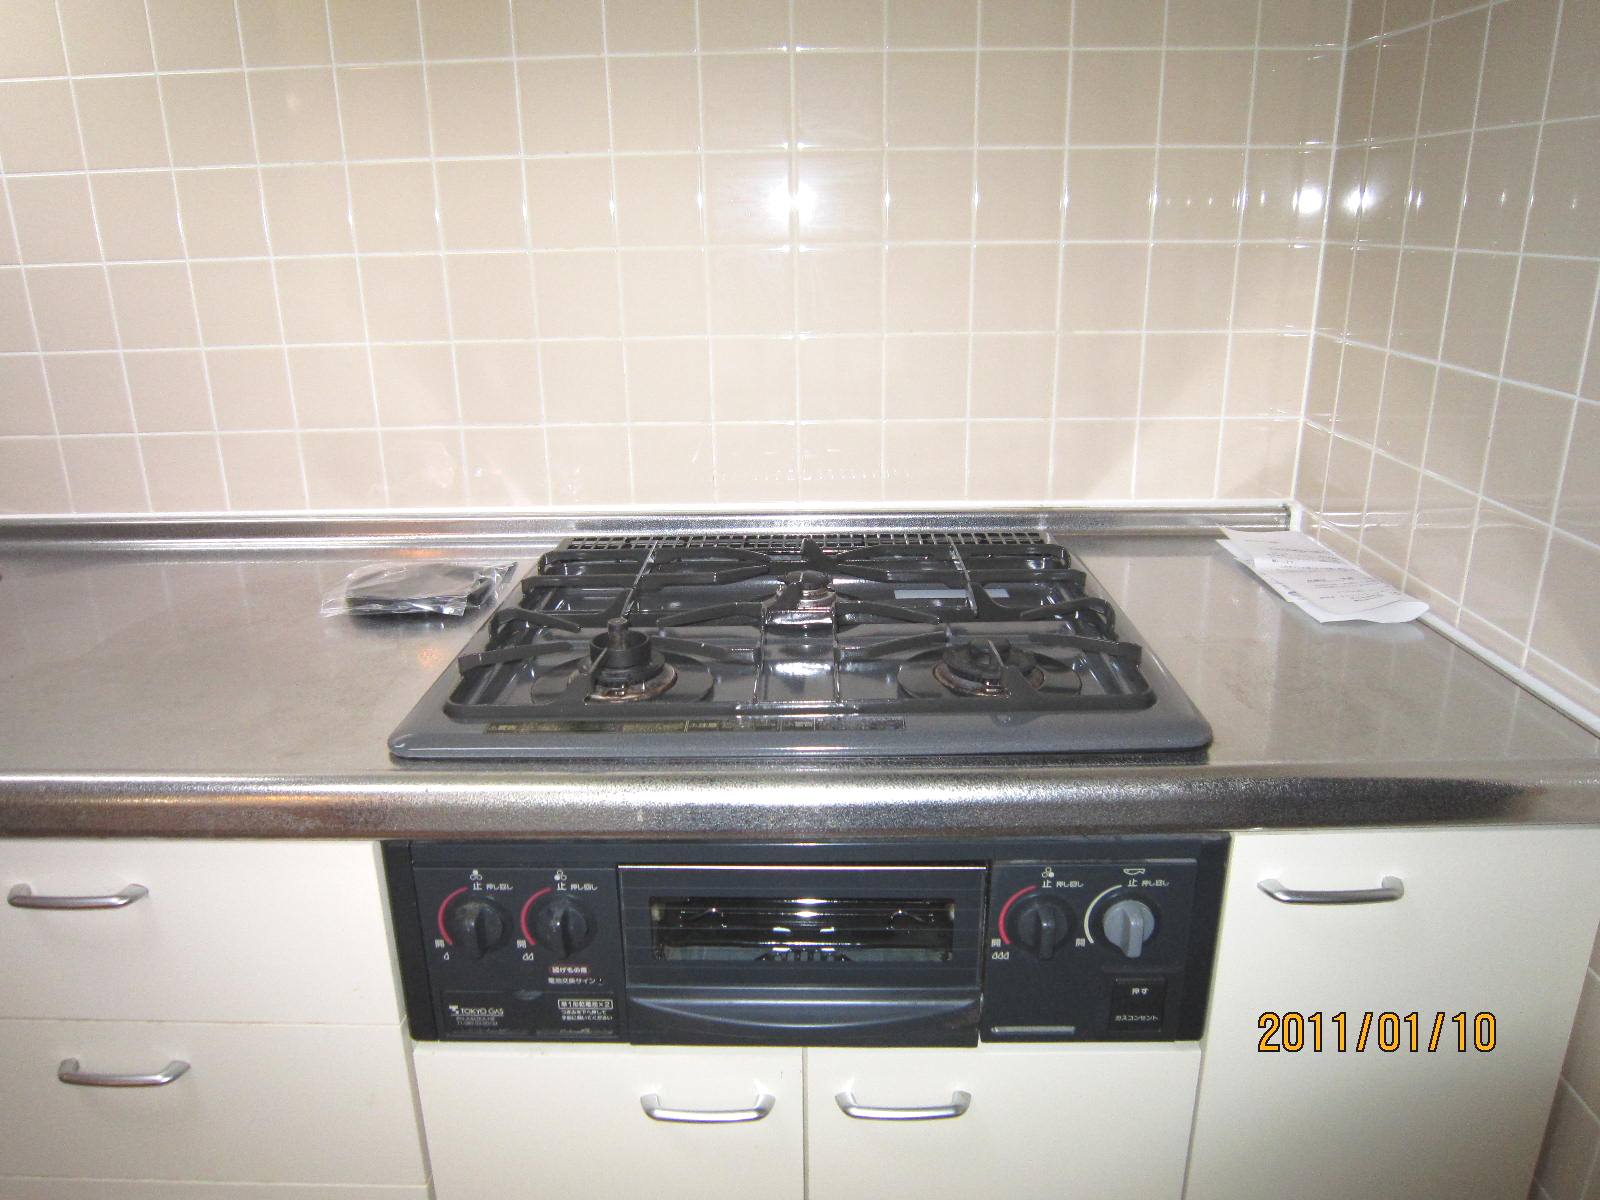 Kitchen. There is a drop-in stove